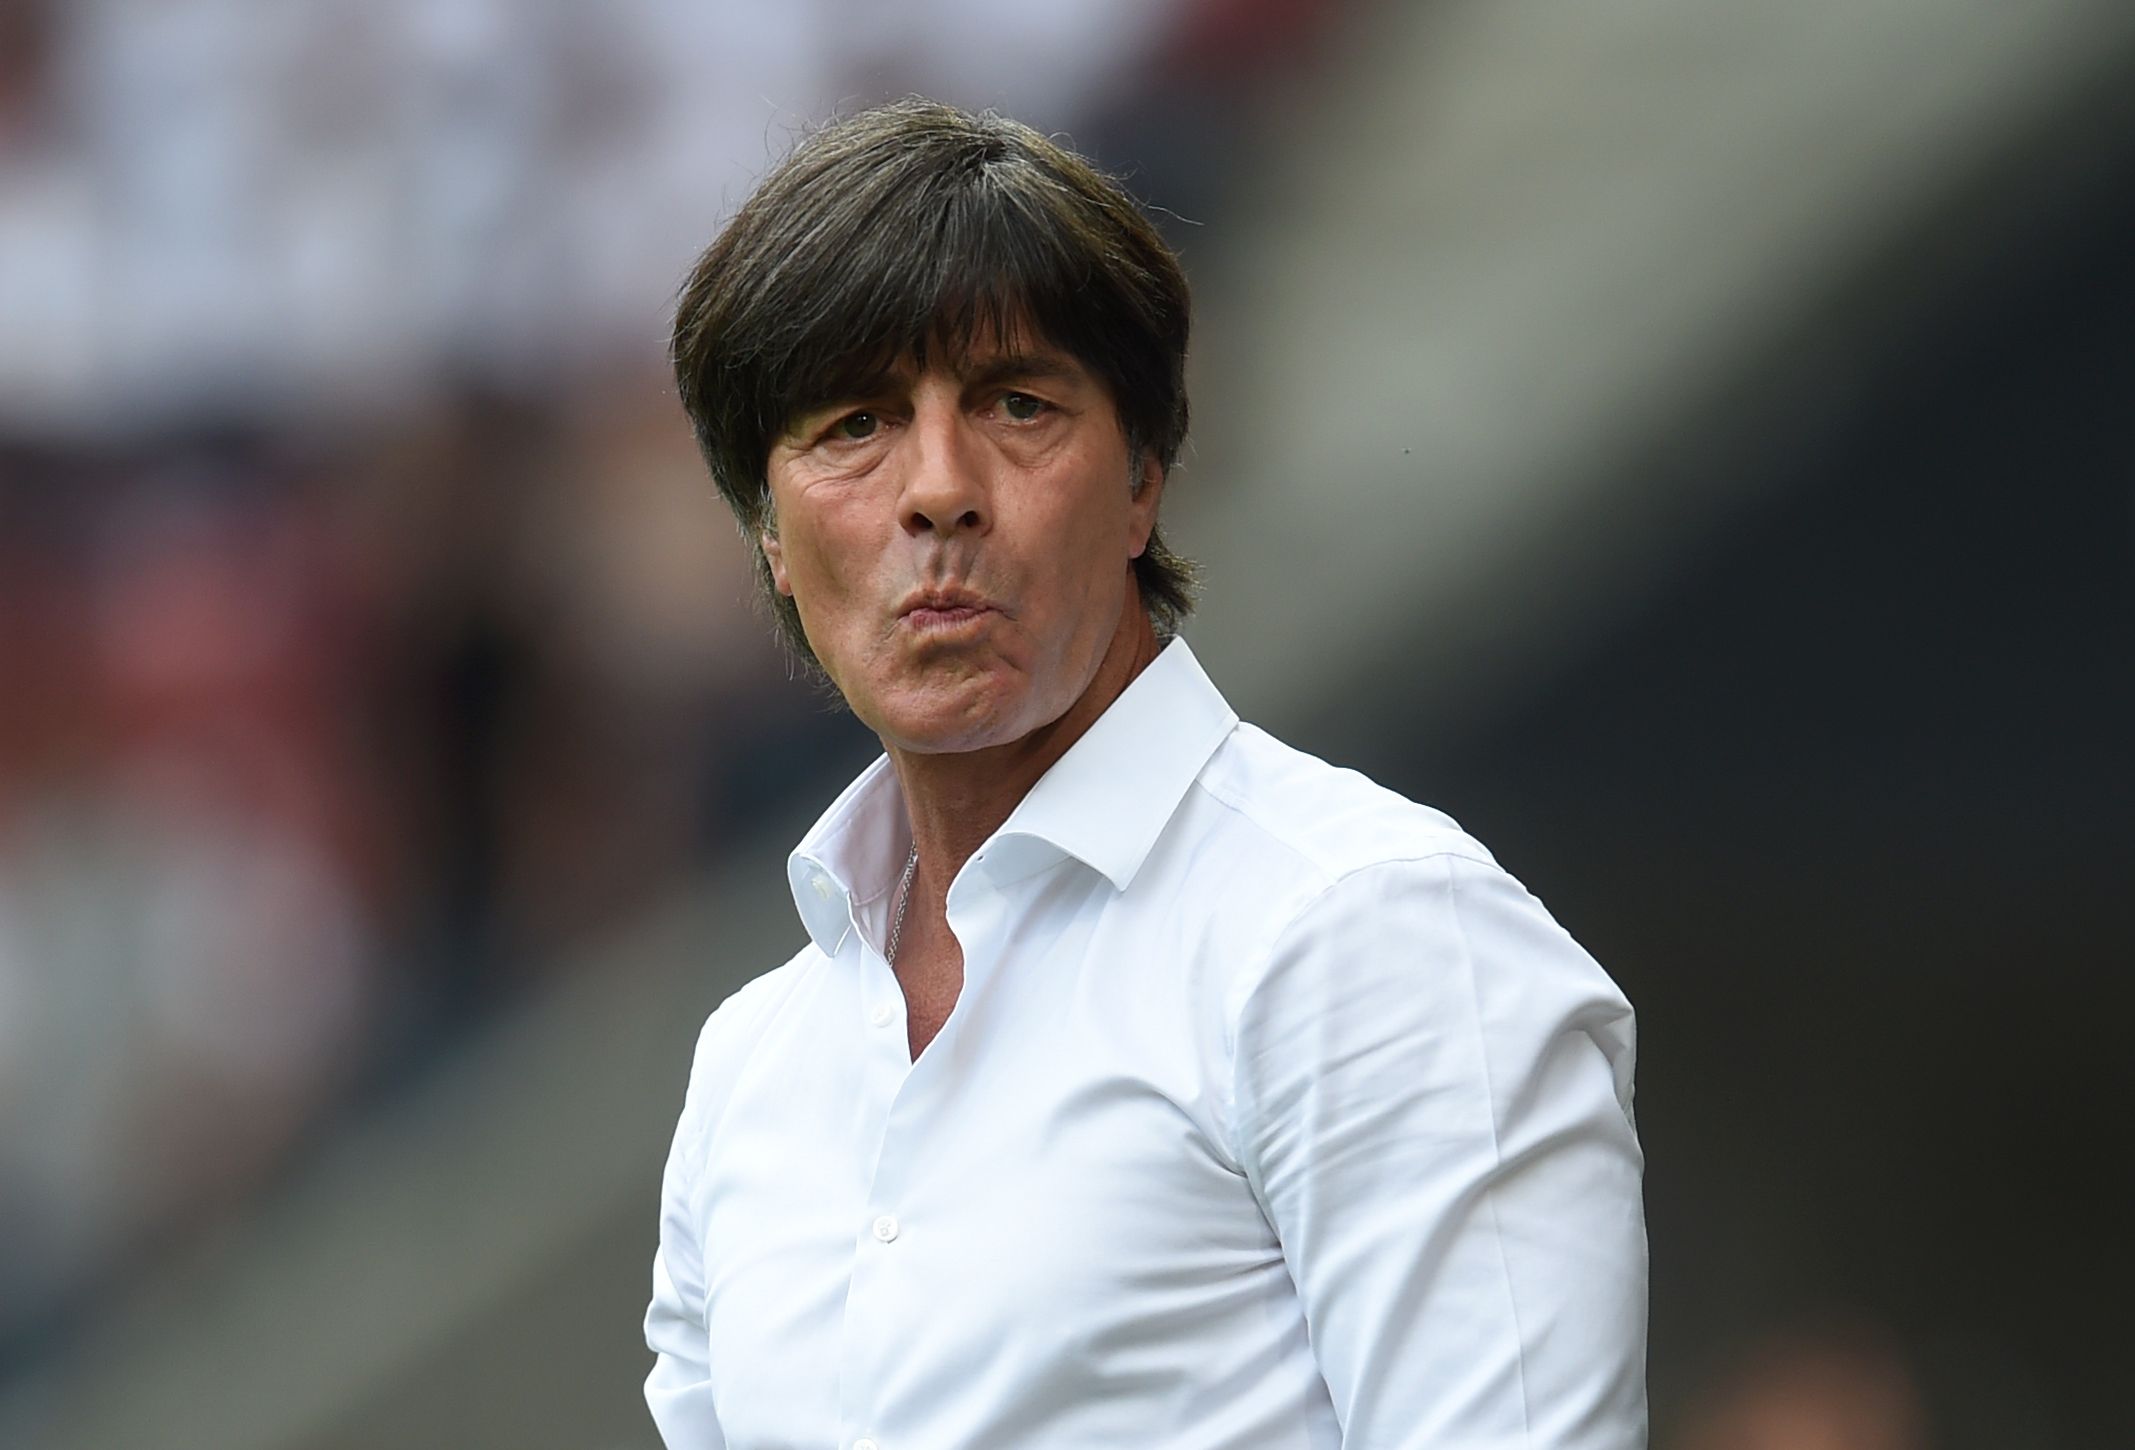 Germany's Loew to stay on despite Euro disappointment